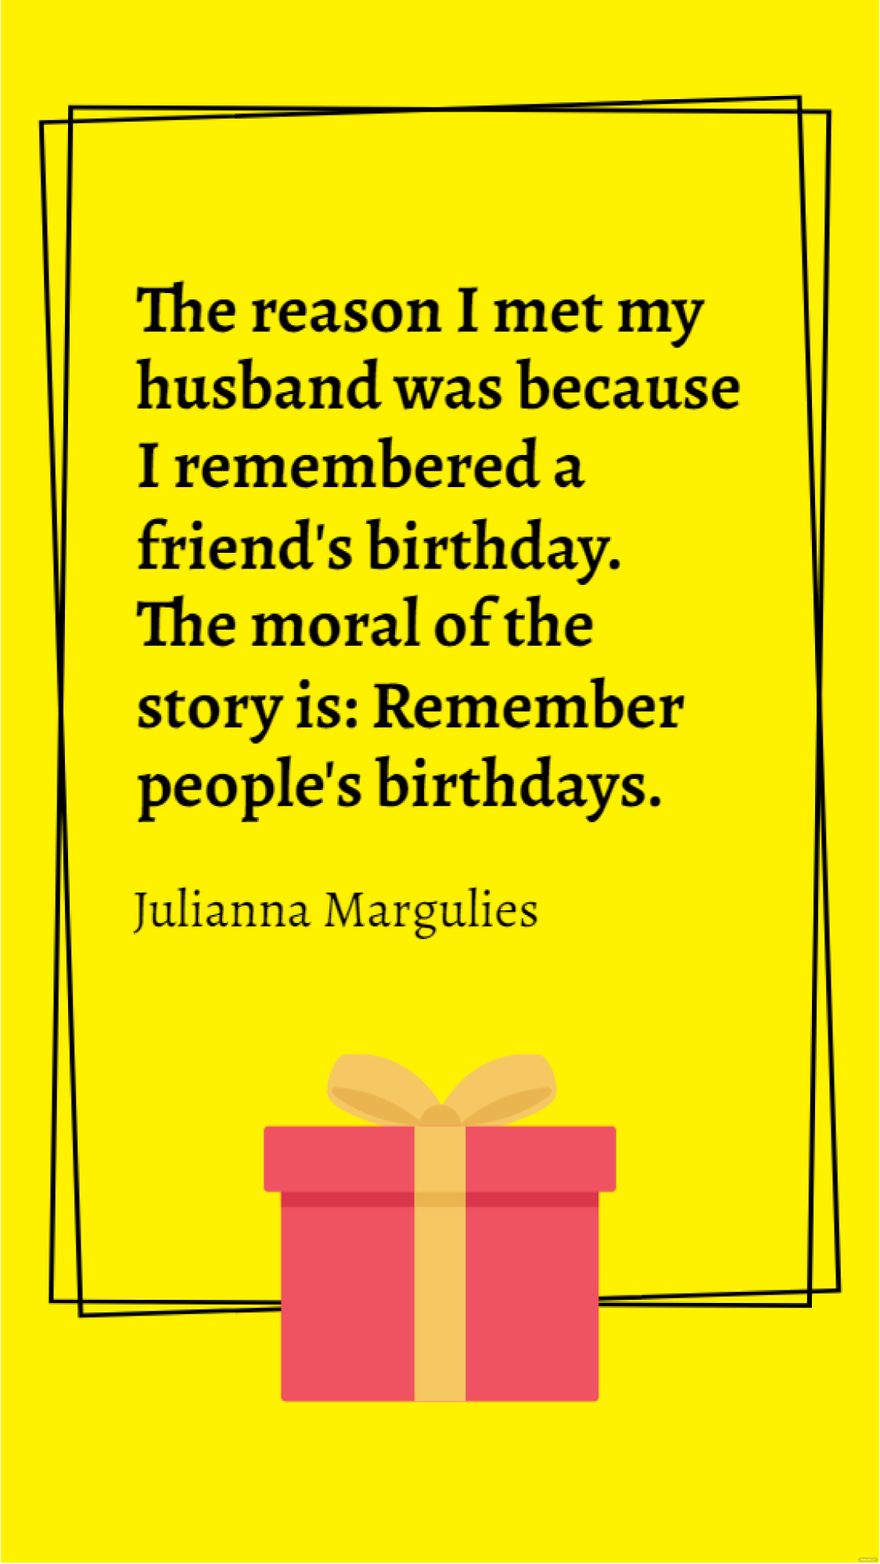 Julianna Margulies - The reason I met my husband was because I remembered a friend's birthday. The moral of the story is: Remember people's birthdays.